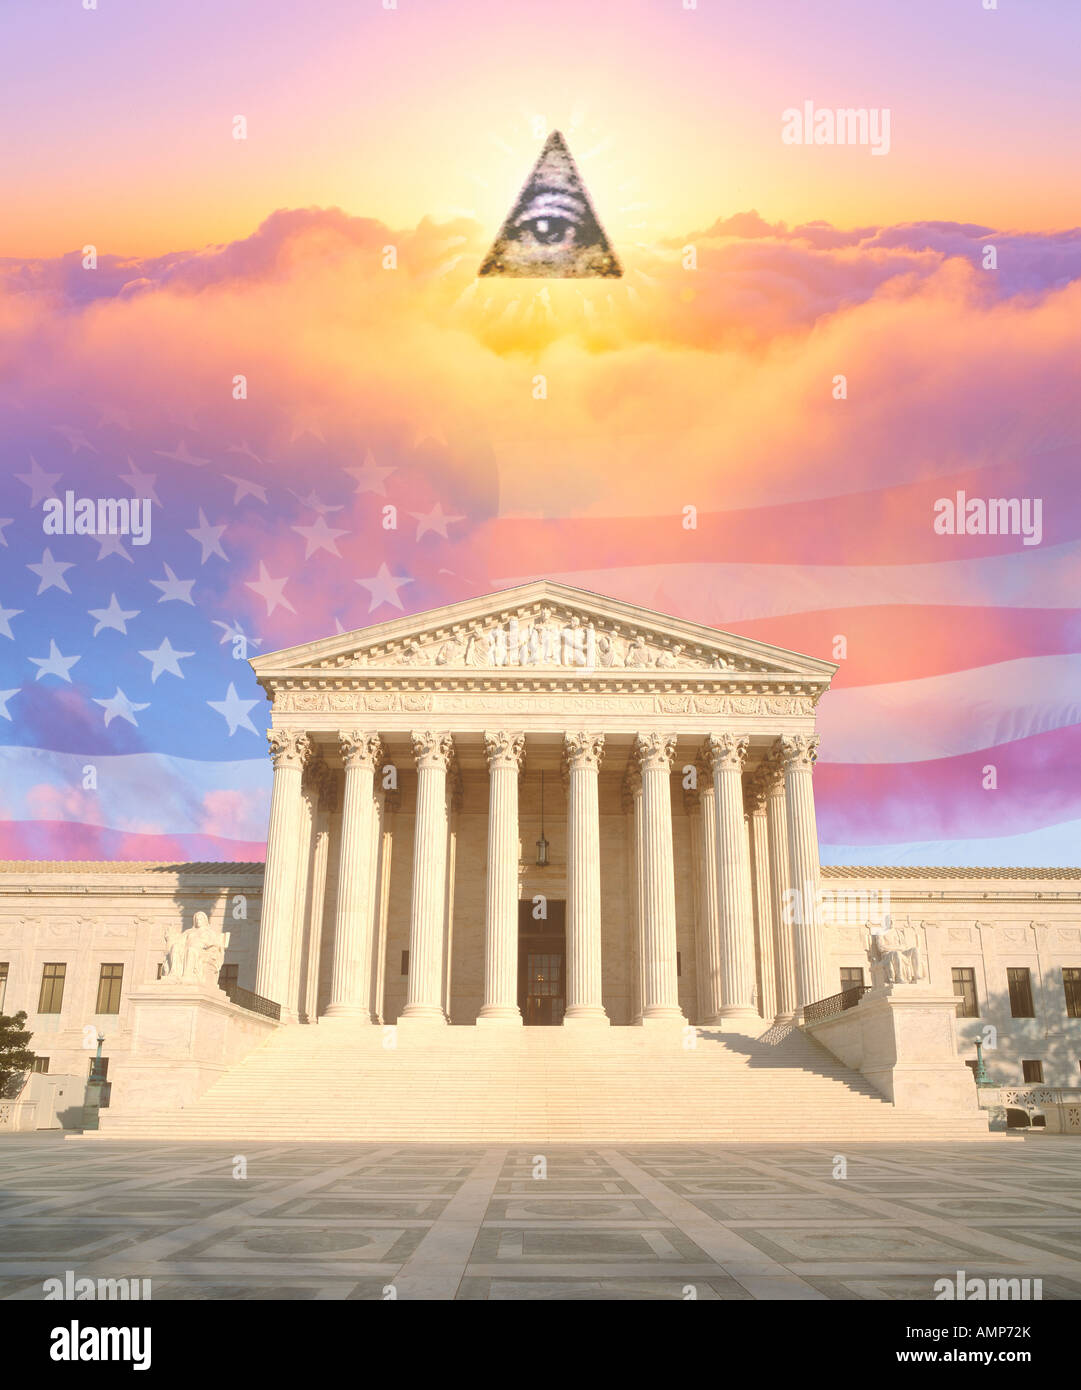 Composite image of the U.S. Supreme Court, American flag, eye of God and colorful sunrise sky Stock Photo